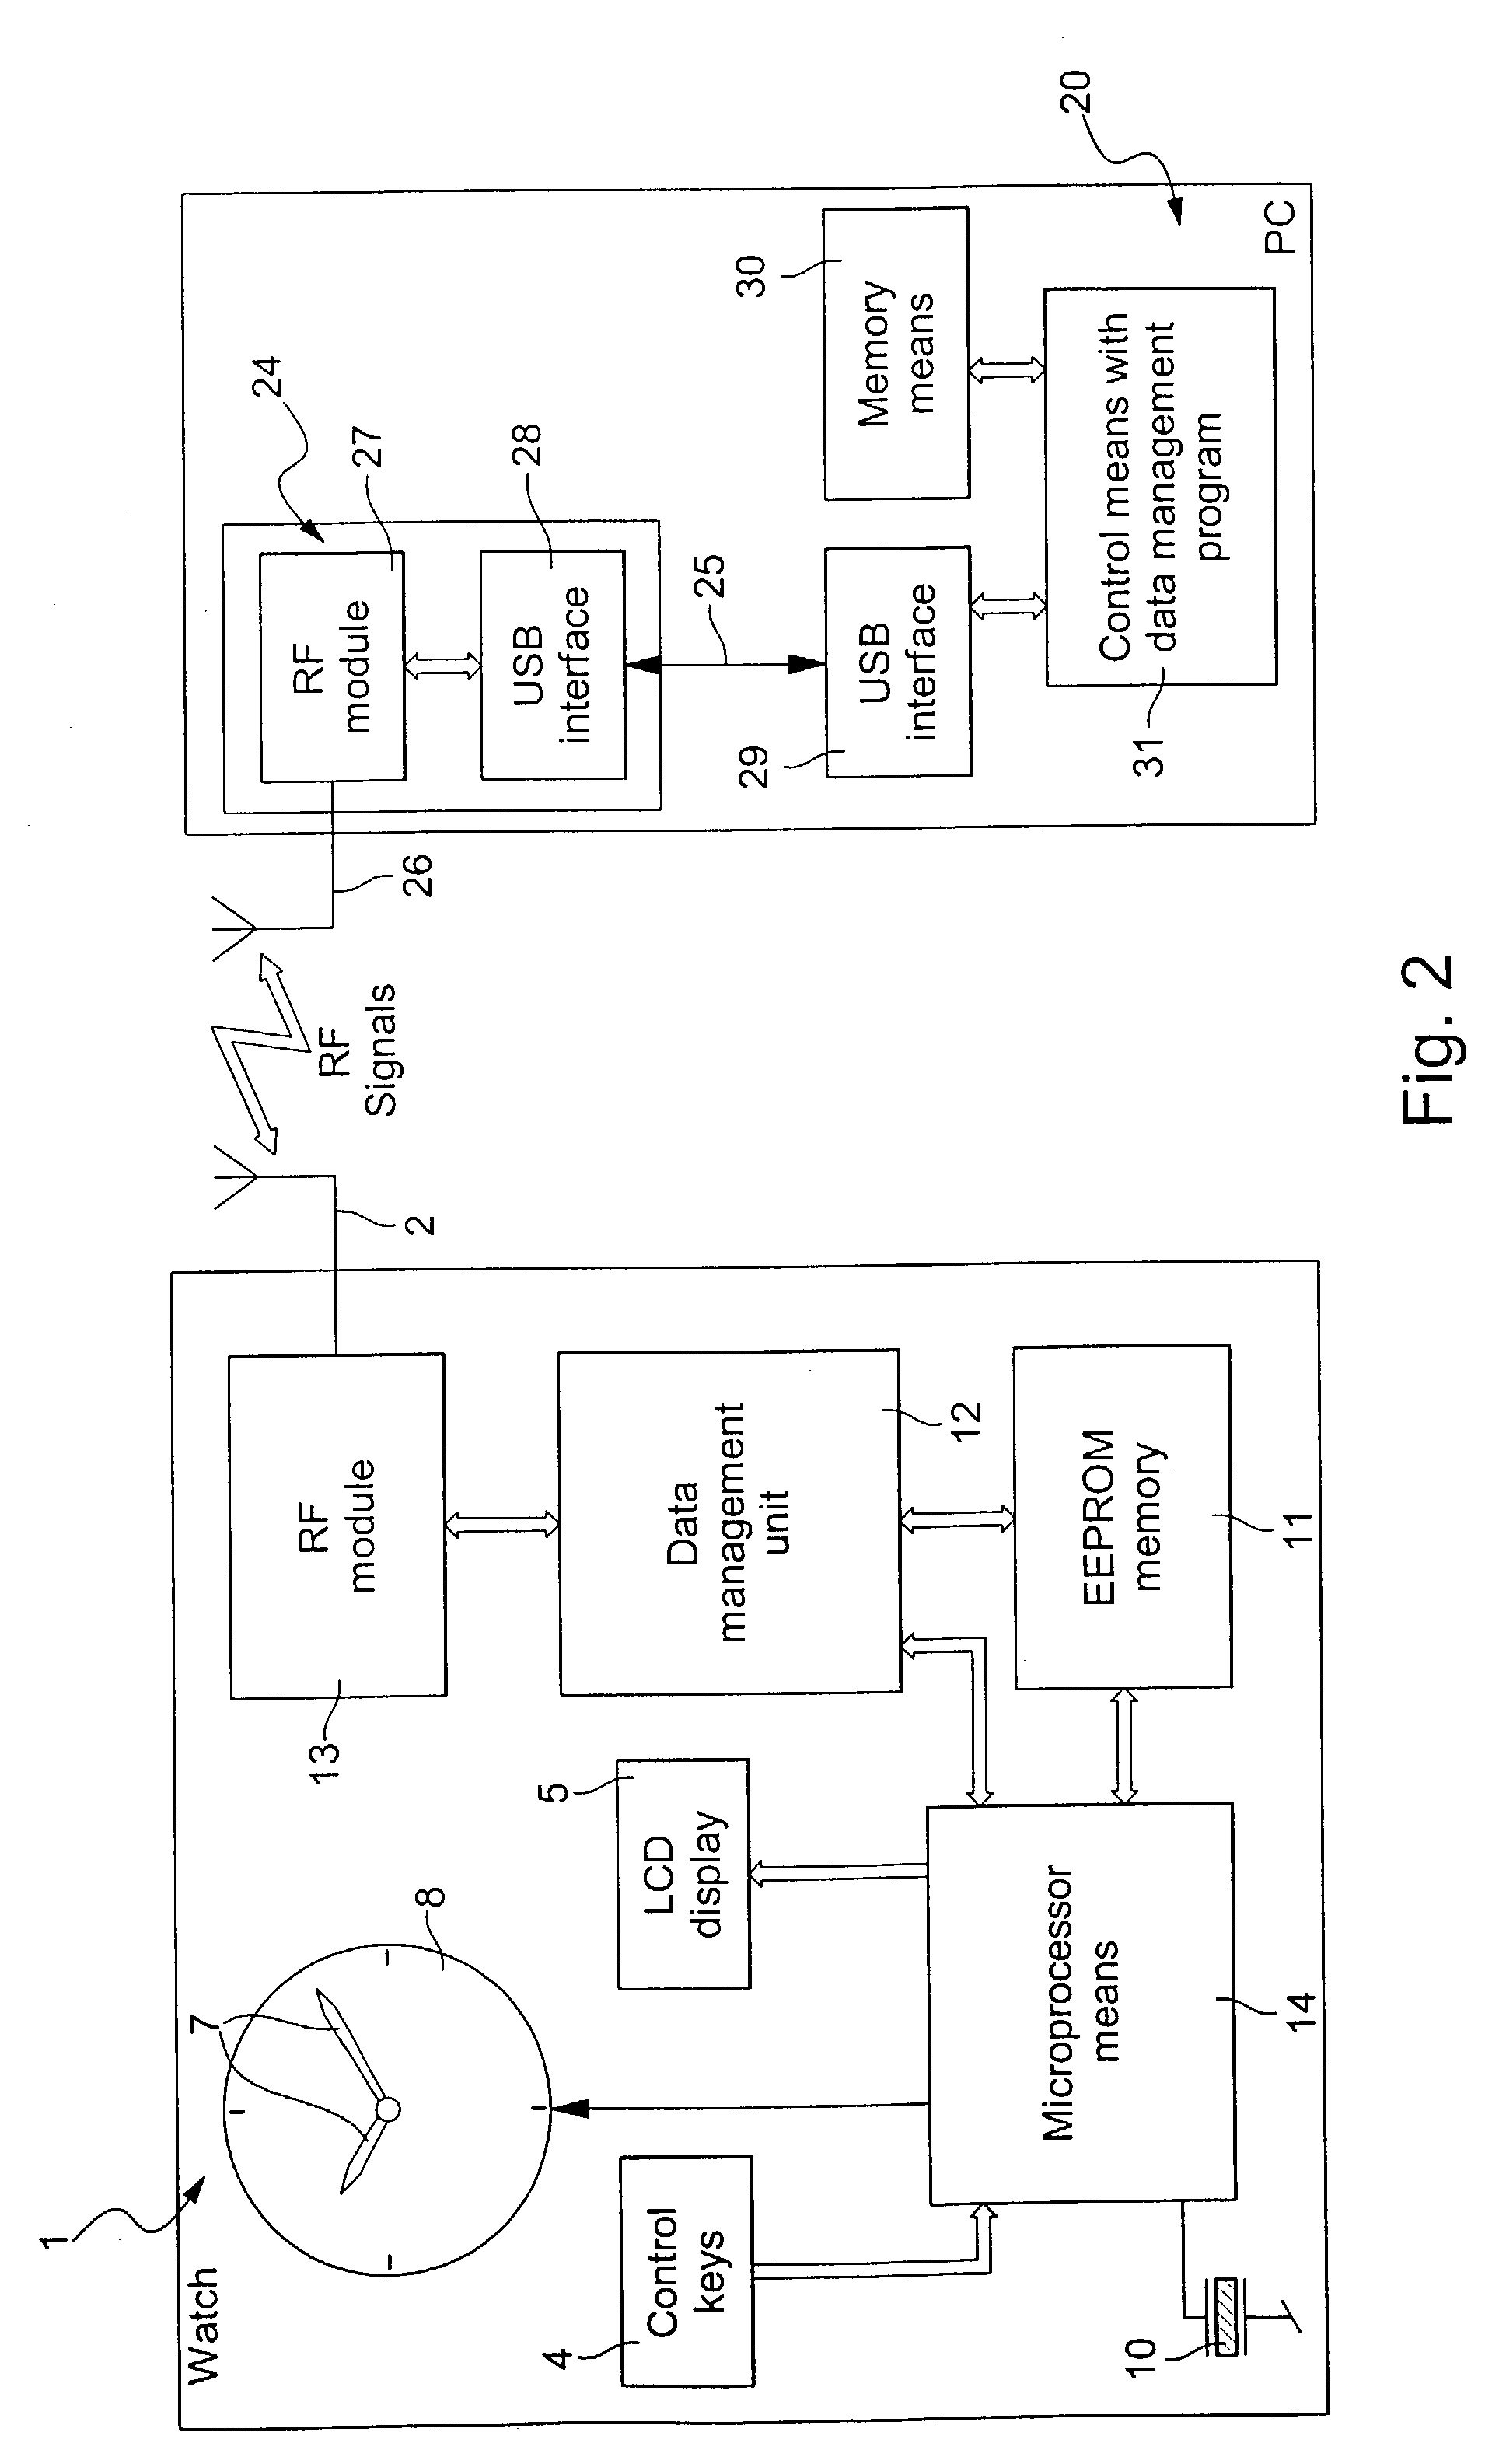 Method of transmitting information between two units each provided with means for sending and/or receiving signals